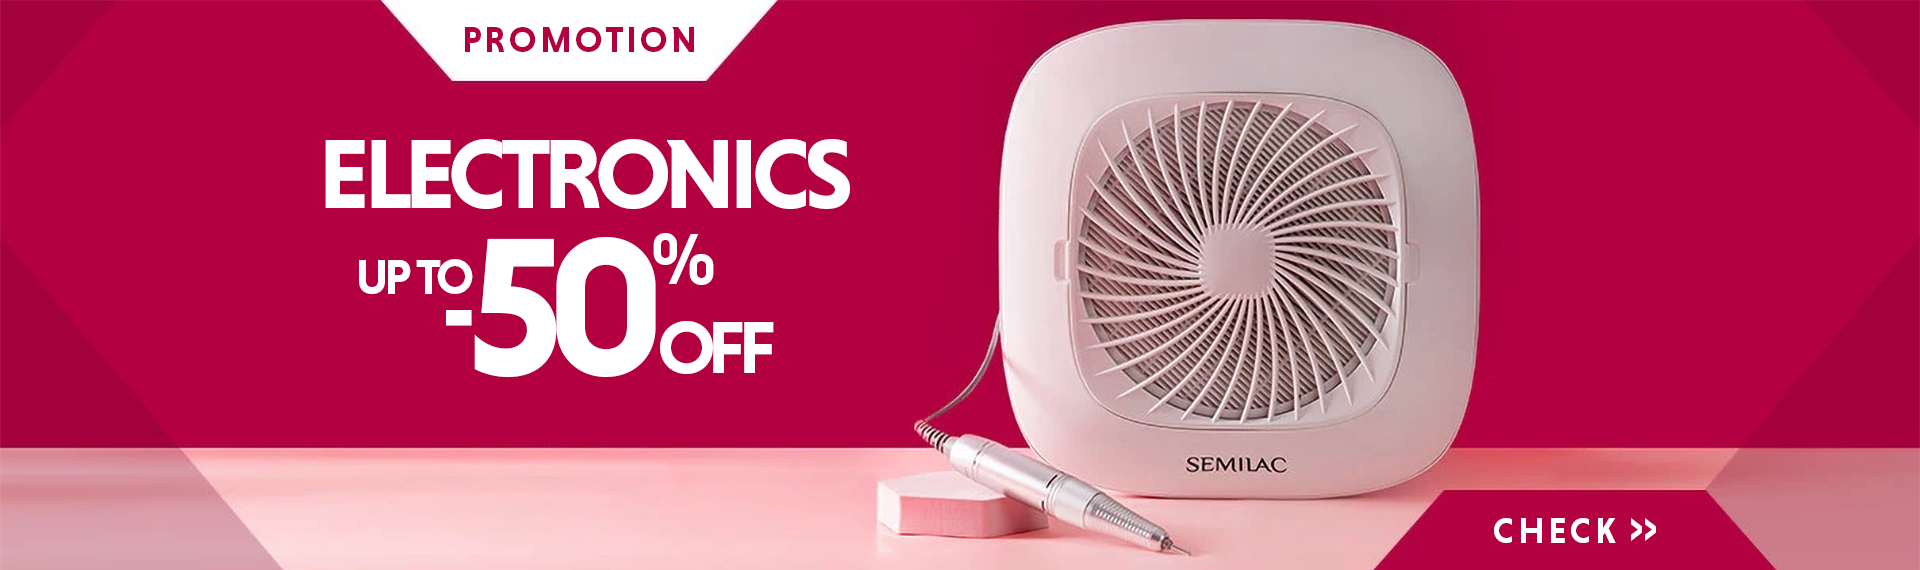 ELECTRONICS UP TO -50% OFF